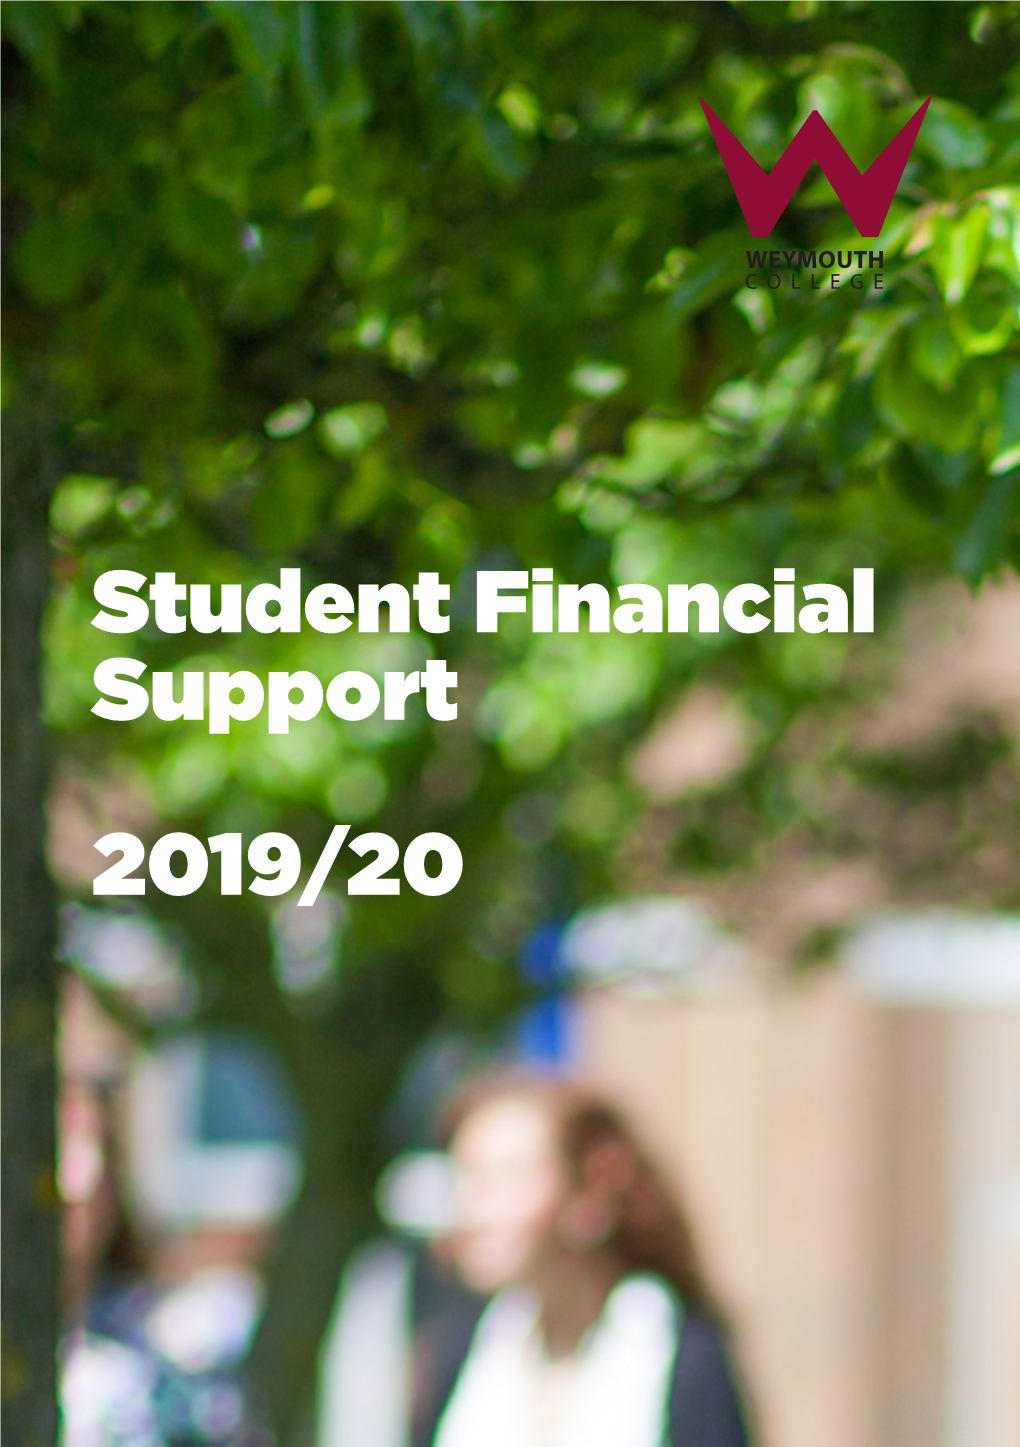 Student Financial Support 2019/20 Weymouth College Is Recognised As Example of Good Practice (16 to 19 Bursary Fund) by the Education Funding Agency (EFA)